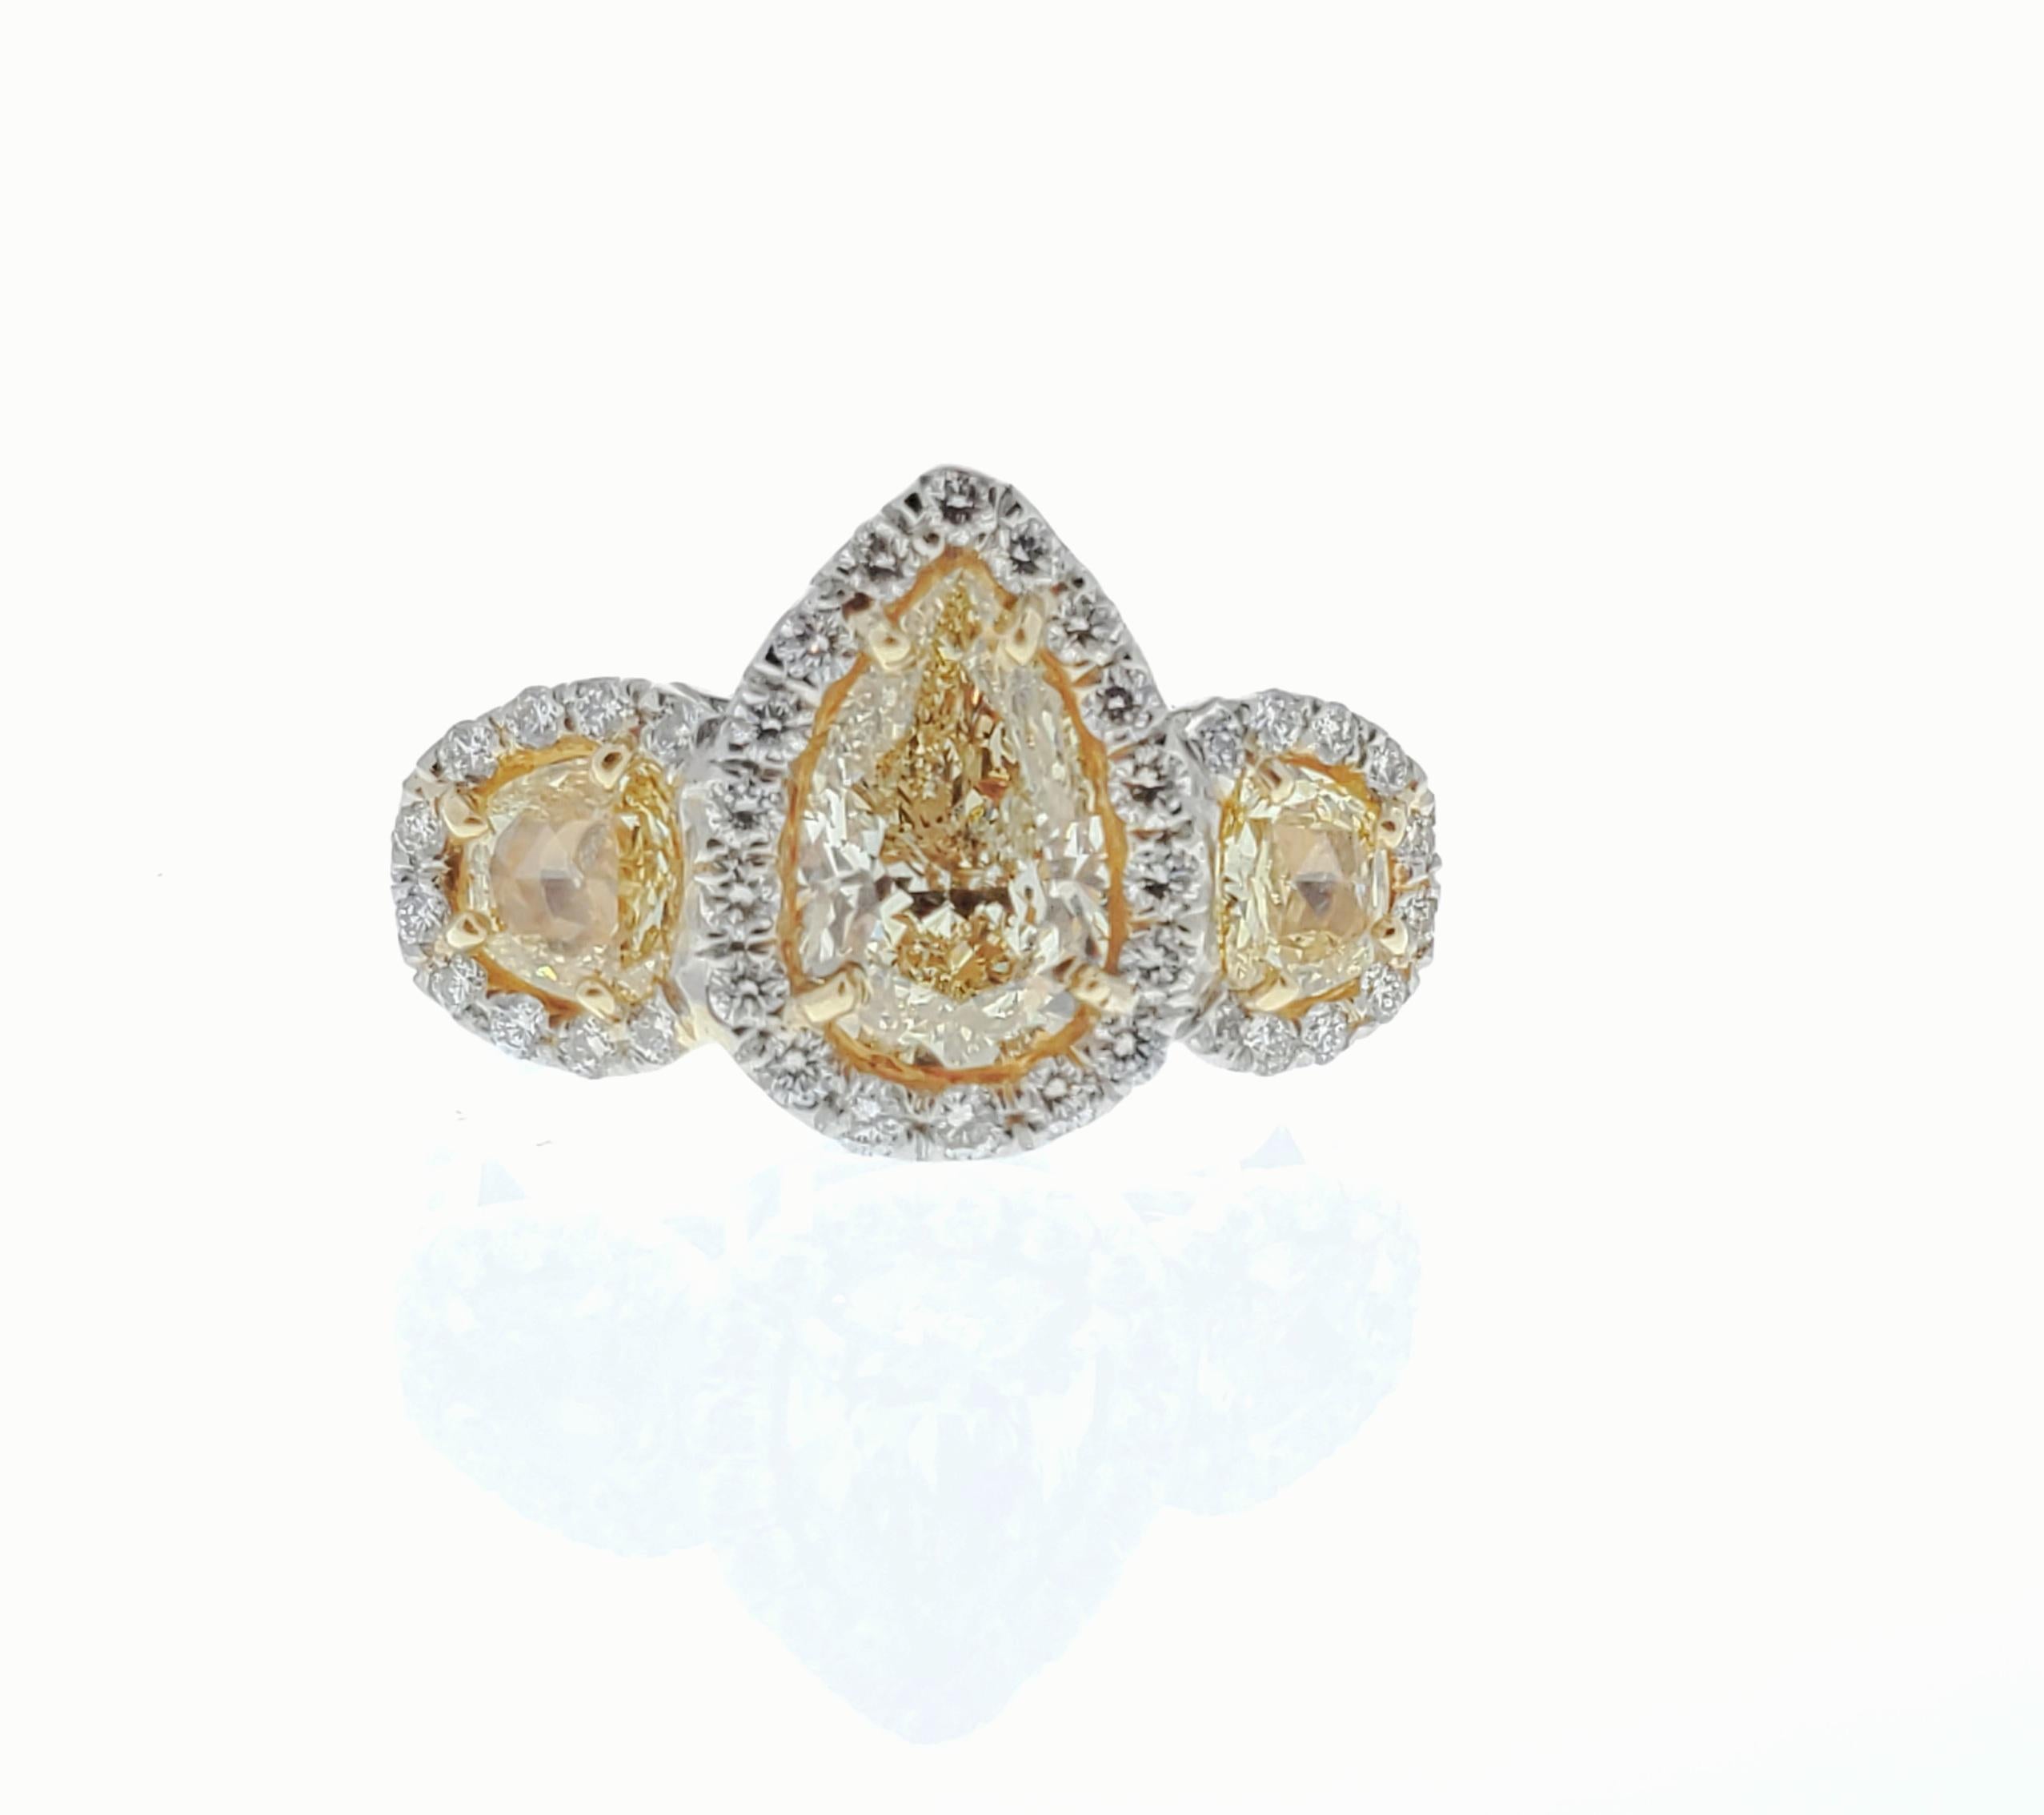 Contemporary GIA Certified 1.53 Carat Natural Yellow Diamond Ring in Platinum